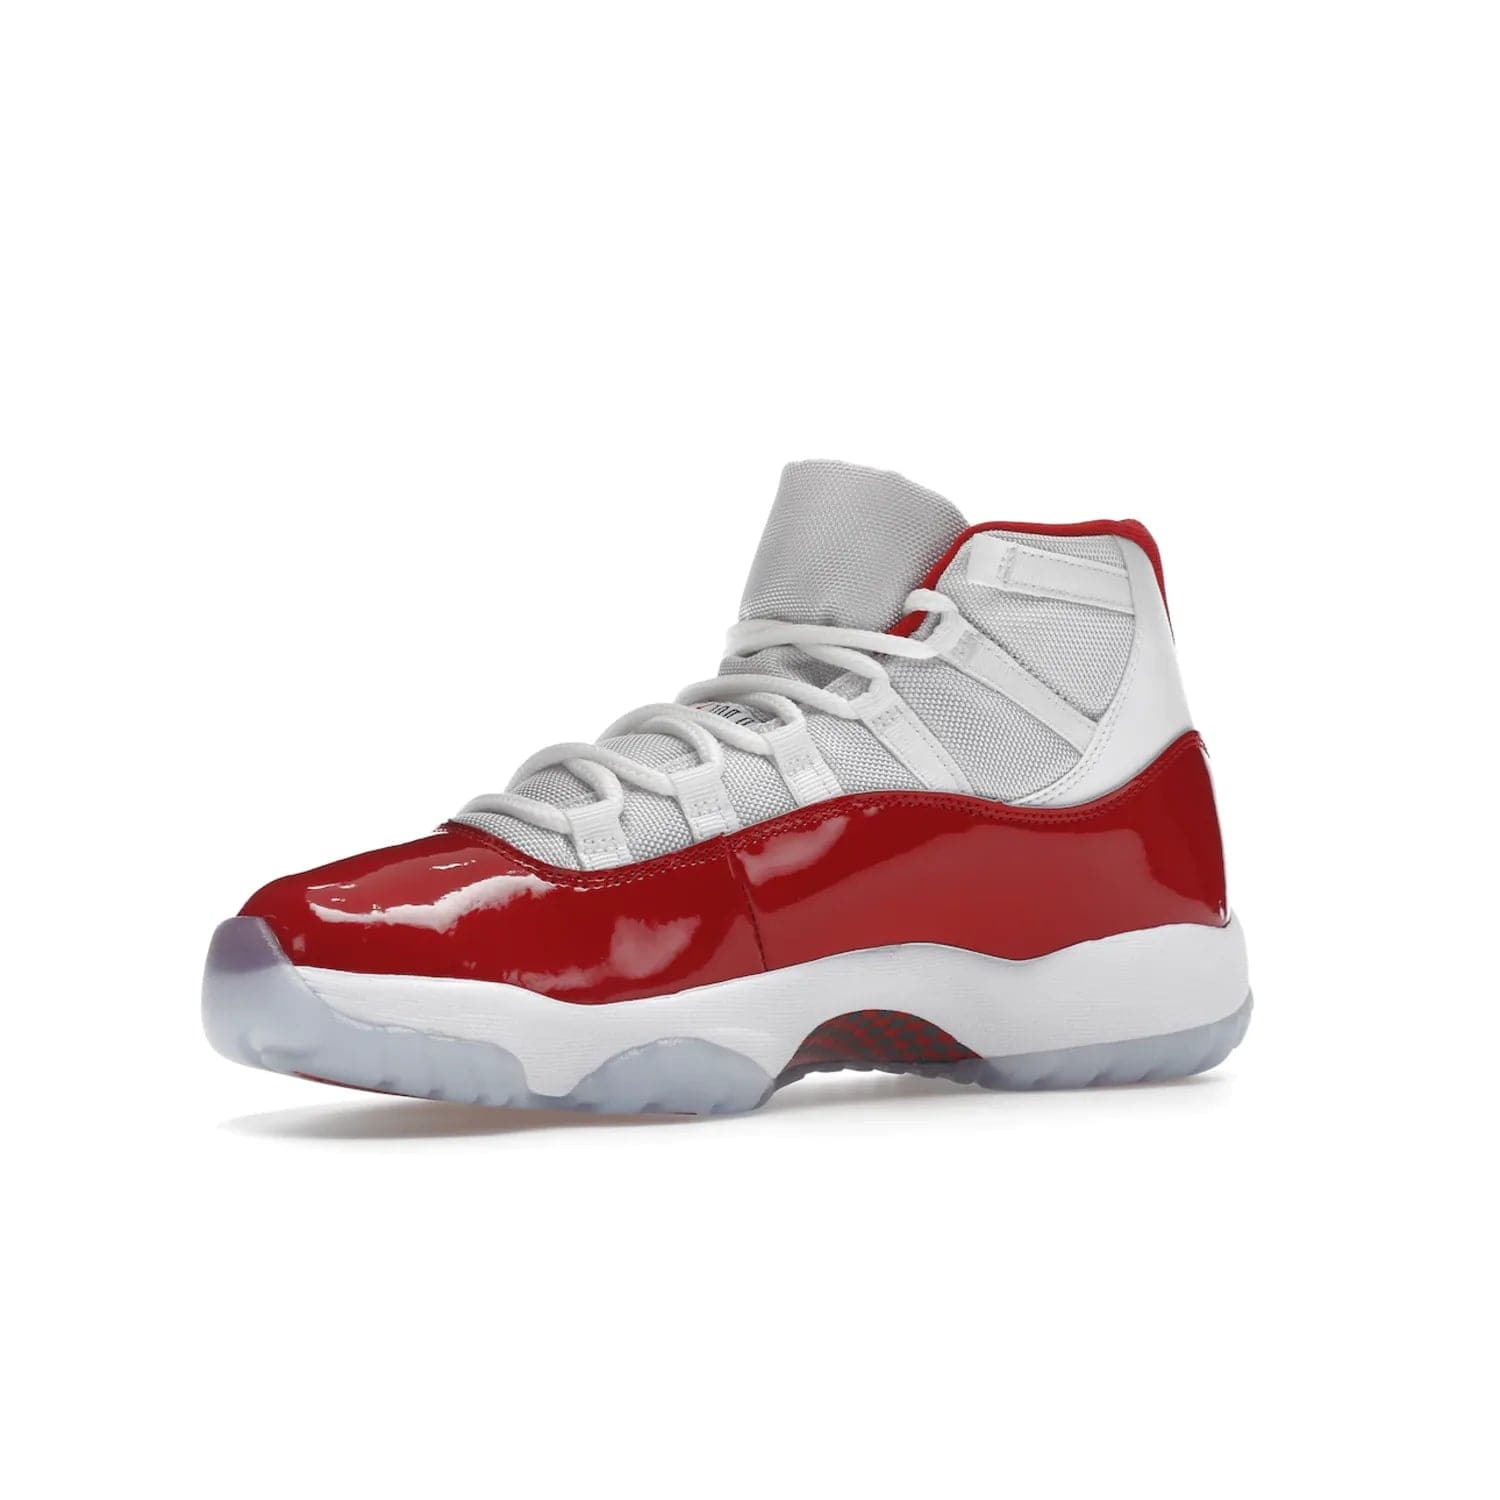 Jordan 11 Retro Cherry (2022) - Image 16 - Only at www.BallersClubKickz.com - The Air Jordan 11 Cherry features classic patent leather with Cherry red accents, icy blue outsole, and debossed 23 on the heel tab. Refresh your sneaker game with this iconic update, available December 10, 2022.